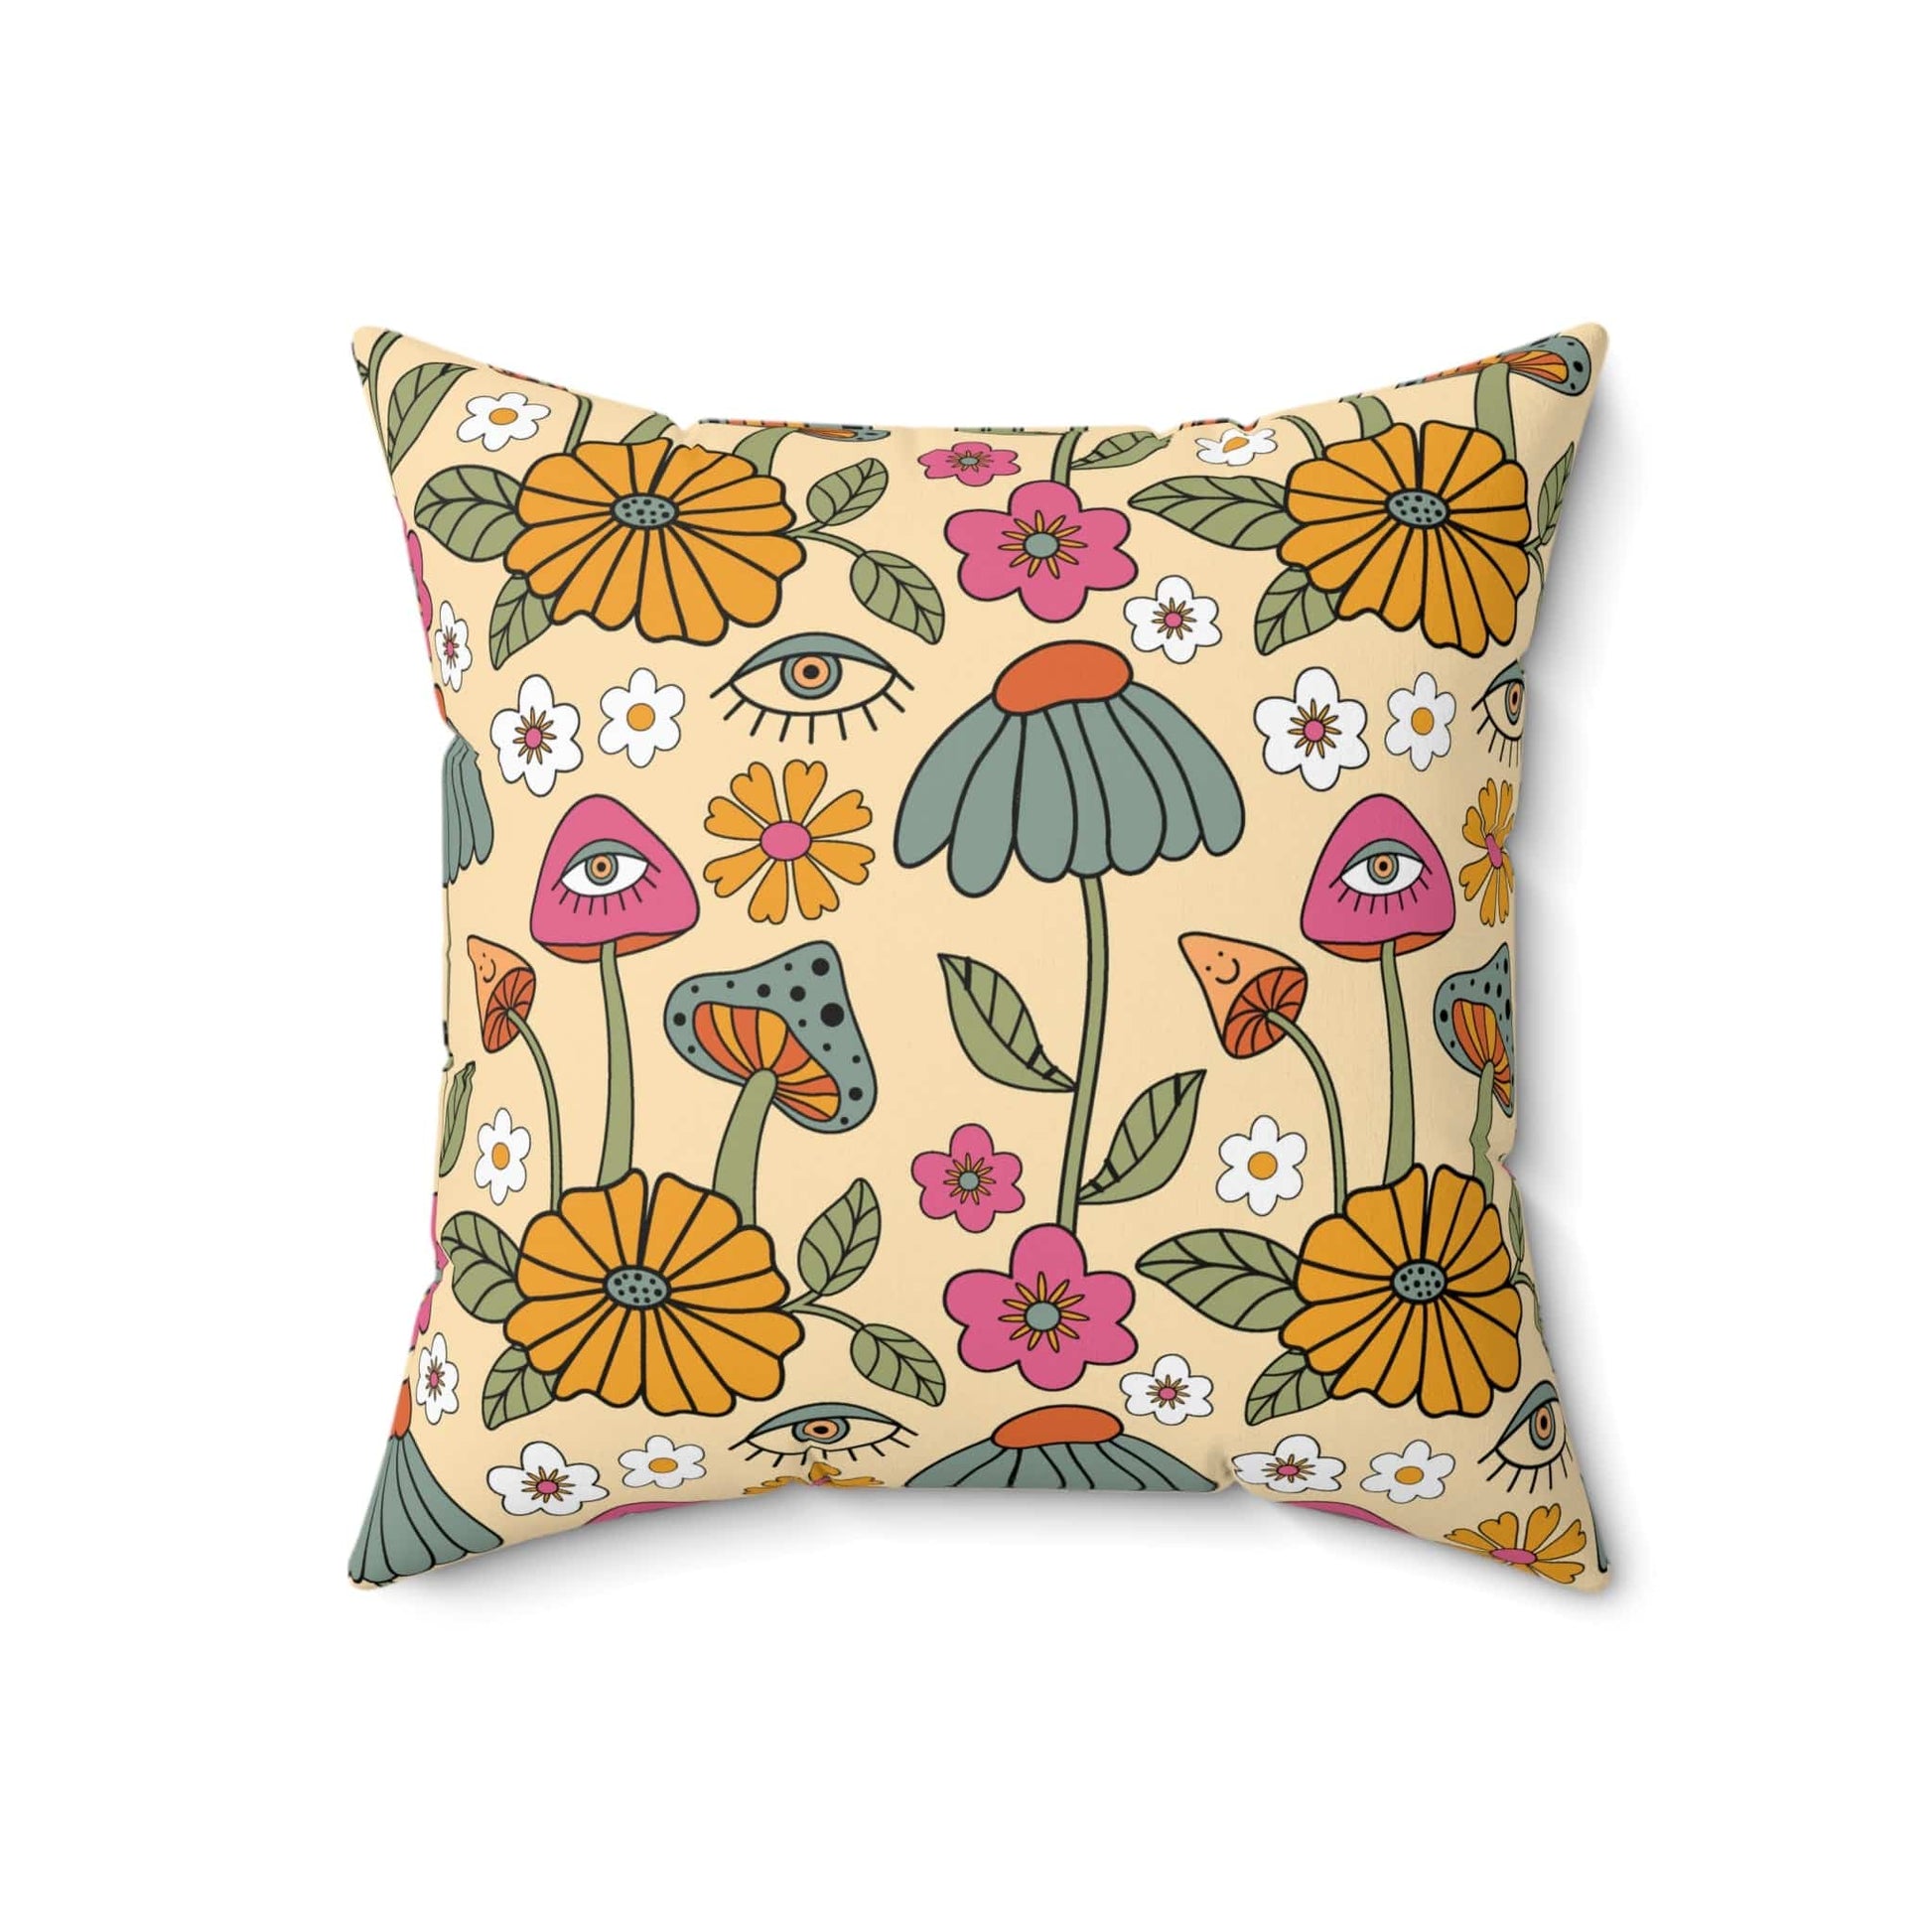 Kate McEnroe New York Hippie Mushroom Cottagecore Aesthetic Throw Pillow with Insert, Retro Floral 70s Psychedelic Accent Pillow Throw Pillows 18" × 18" 45705635629441951177